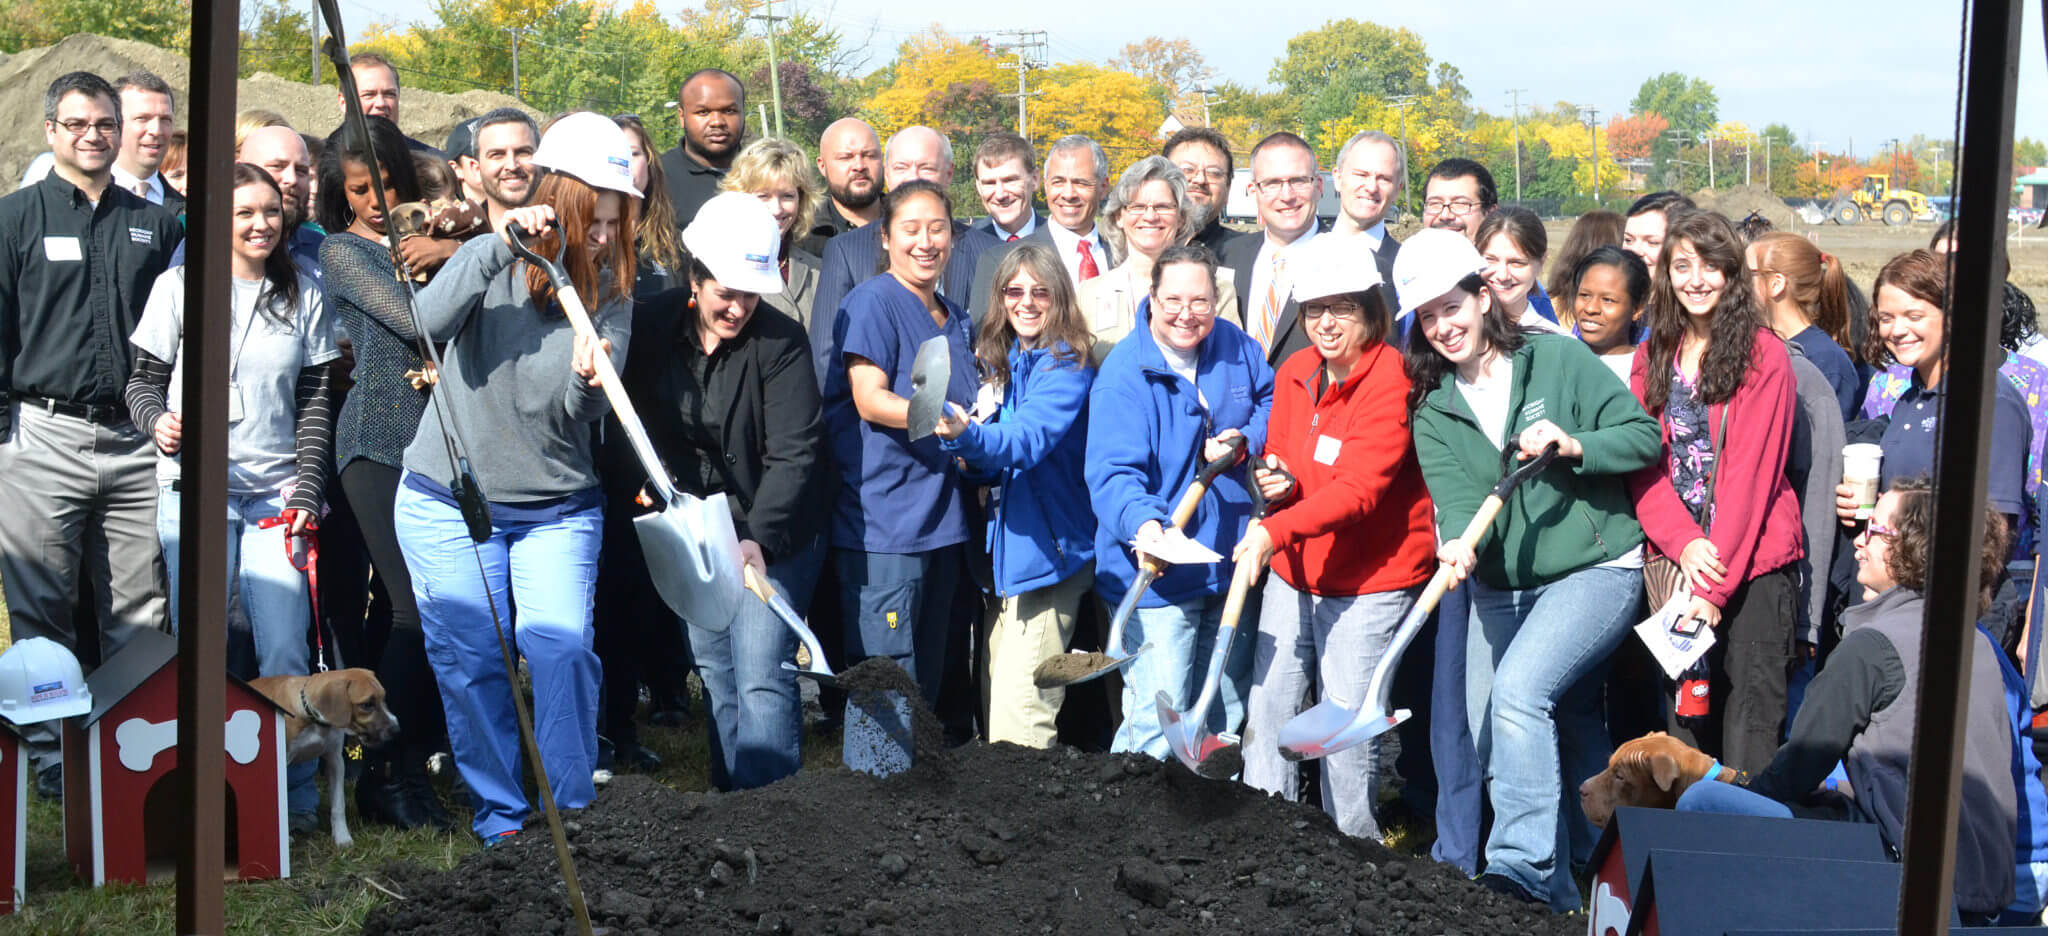 MHS staff is enthusiastic about our new Detroit Animal Care Campus, which will help us save even more animal lives.